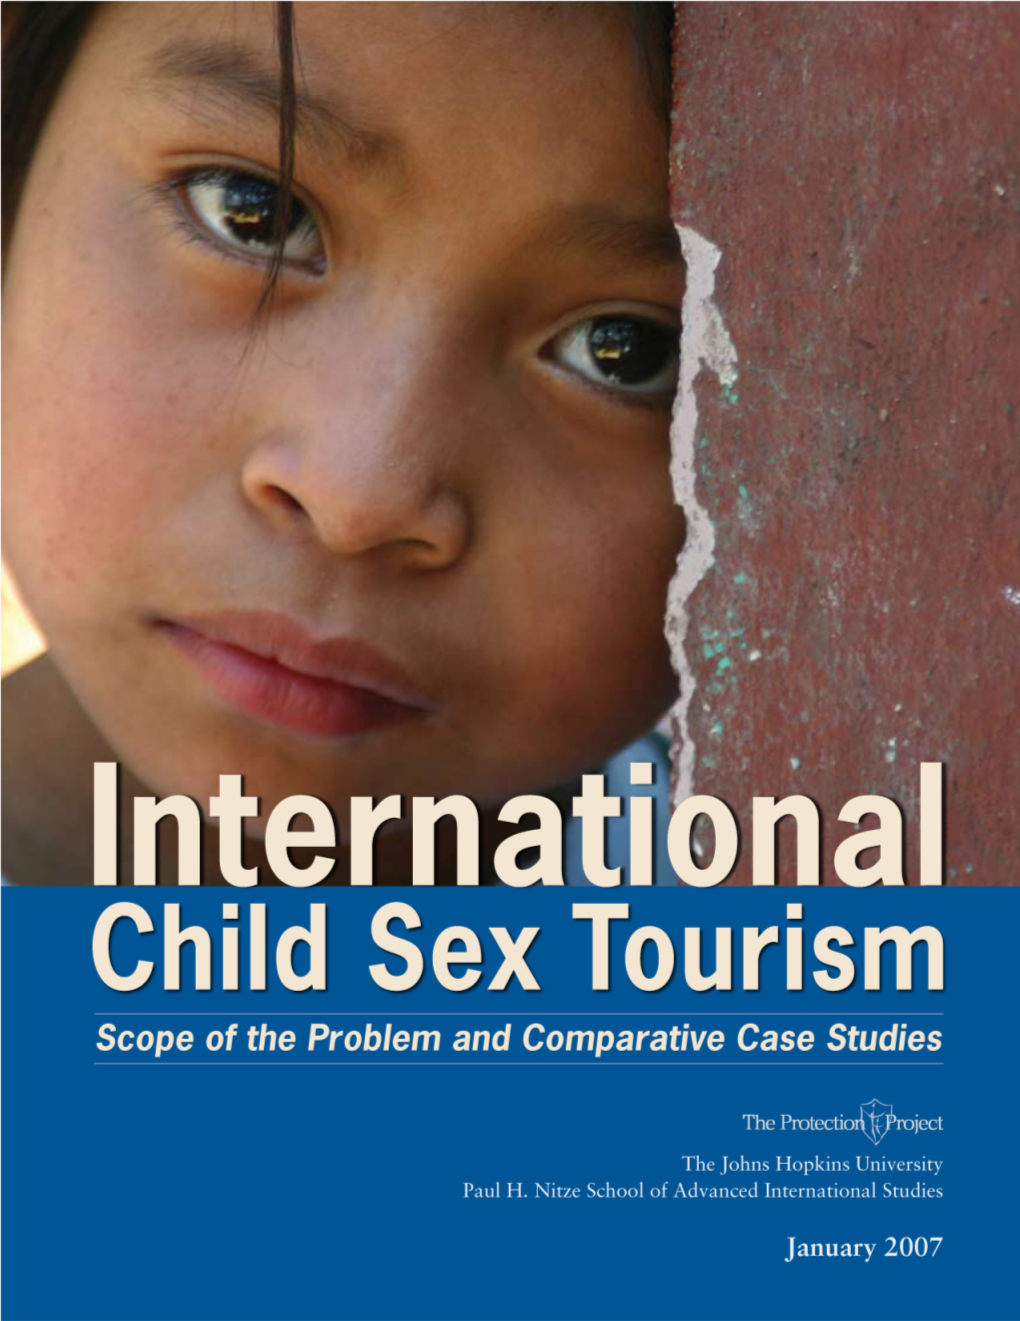 2. the Link Between Child Sex Tourism and Child Trafﬁcking